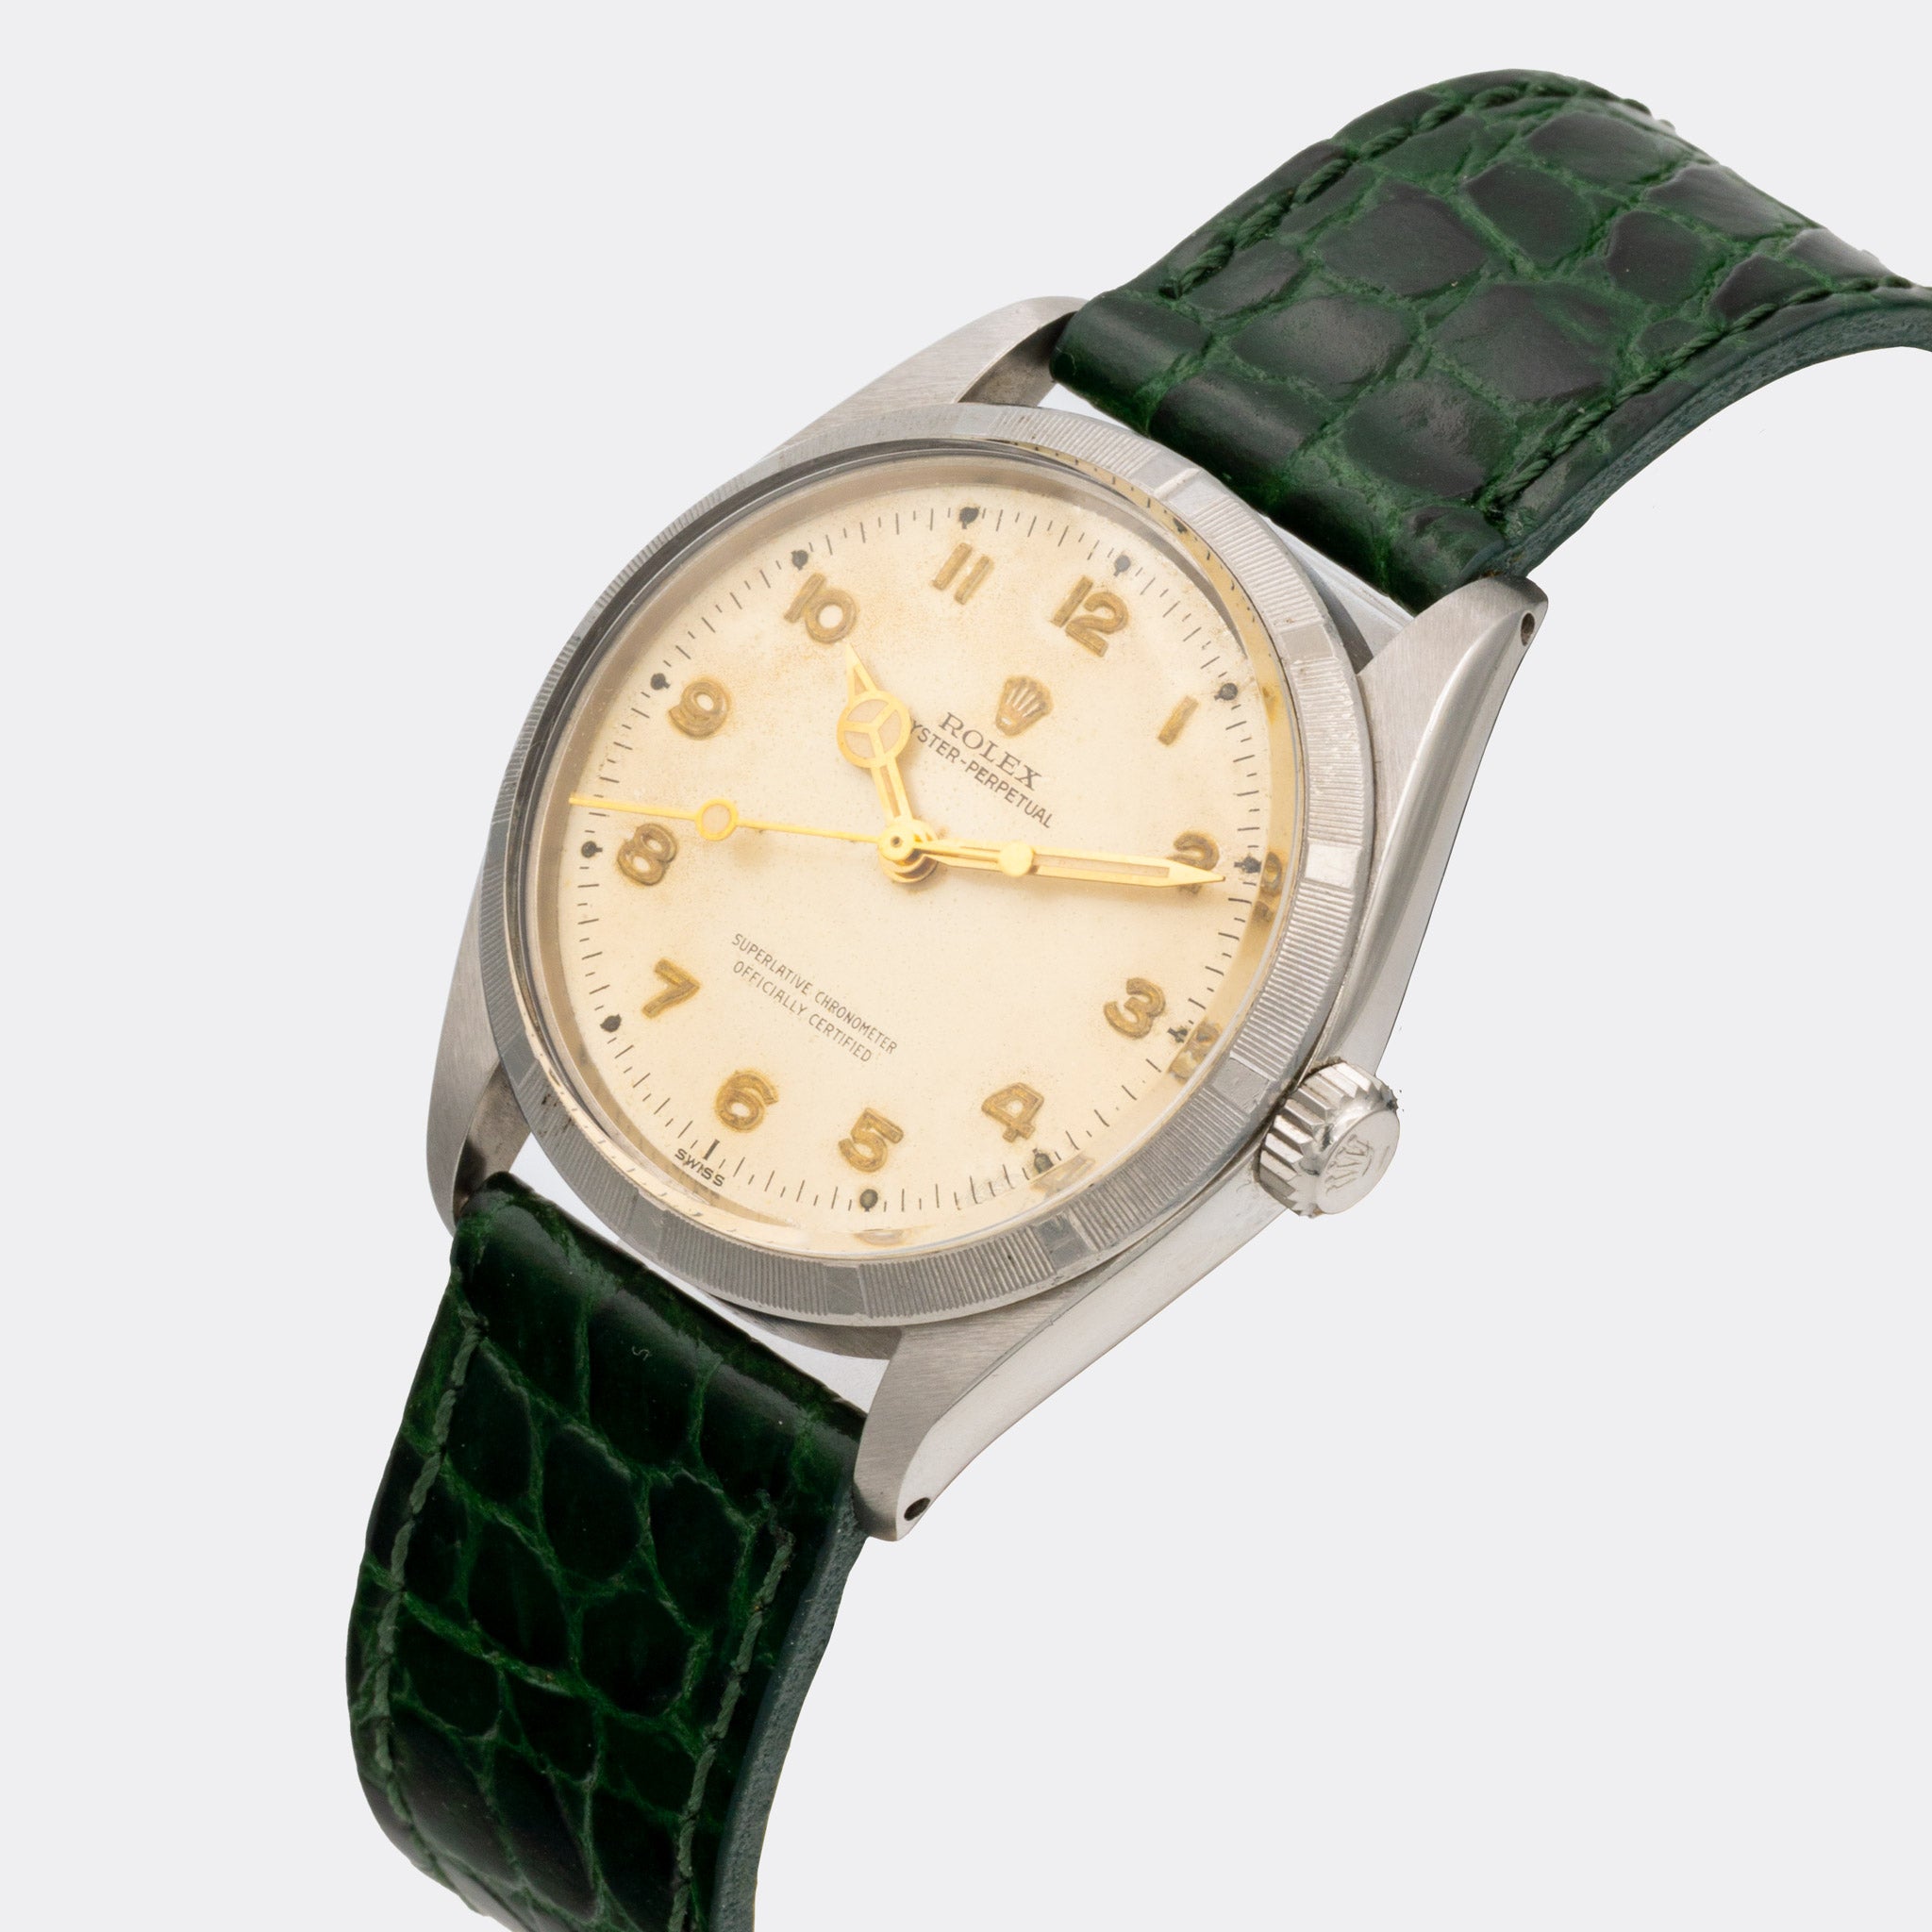 ROLEX | Oyster Perpetual | SCOC Superlative Chronometer | Collector Set | Off-White | Gold Arabic Index Dial | Ref. 1003 | 1960s